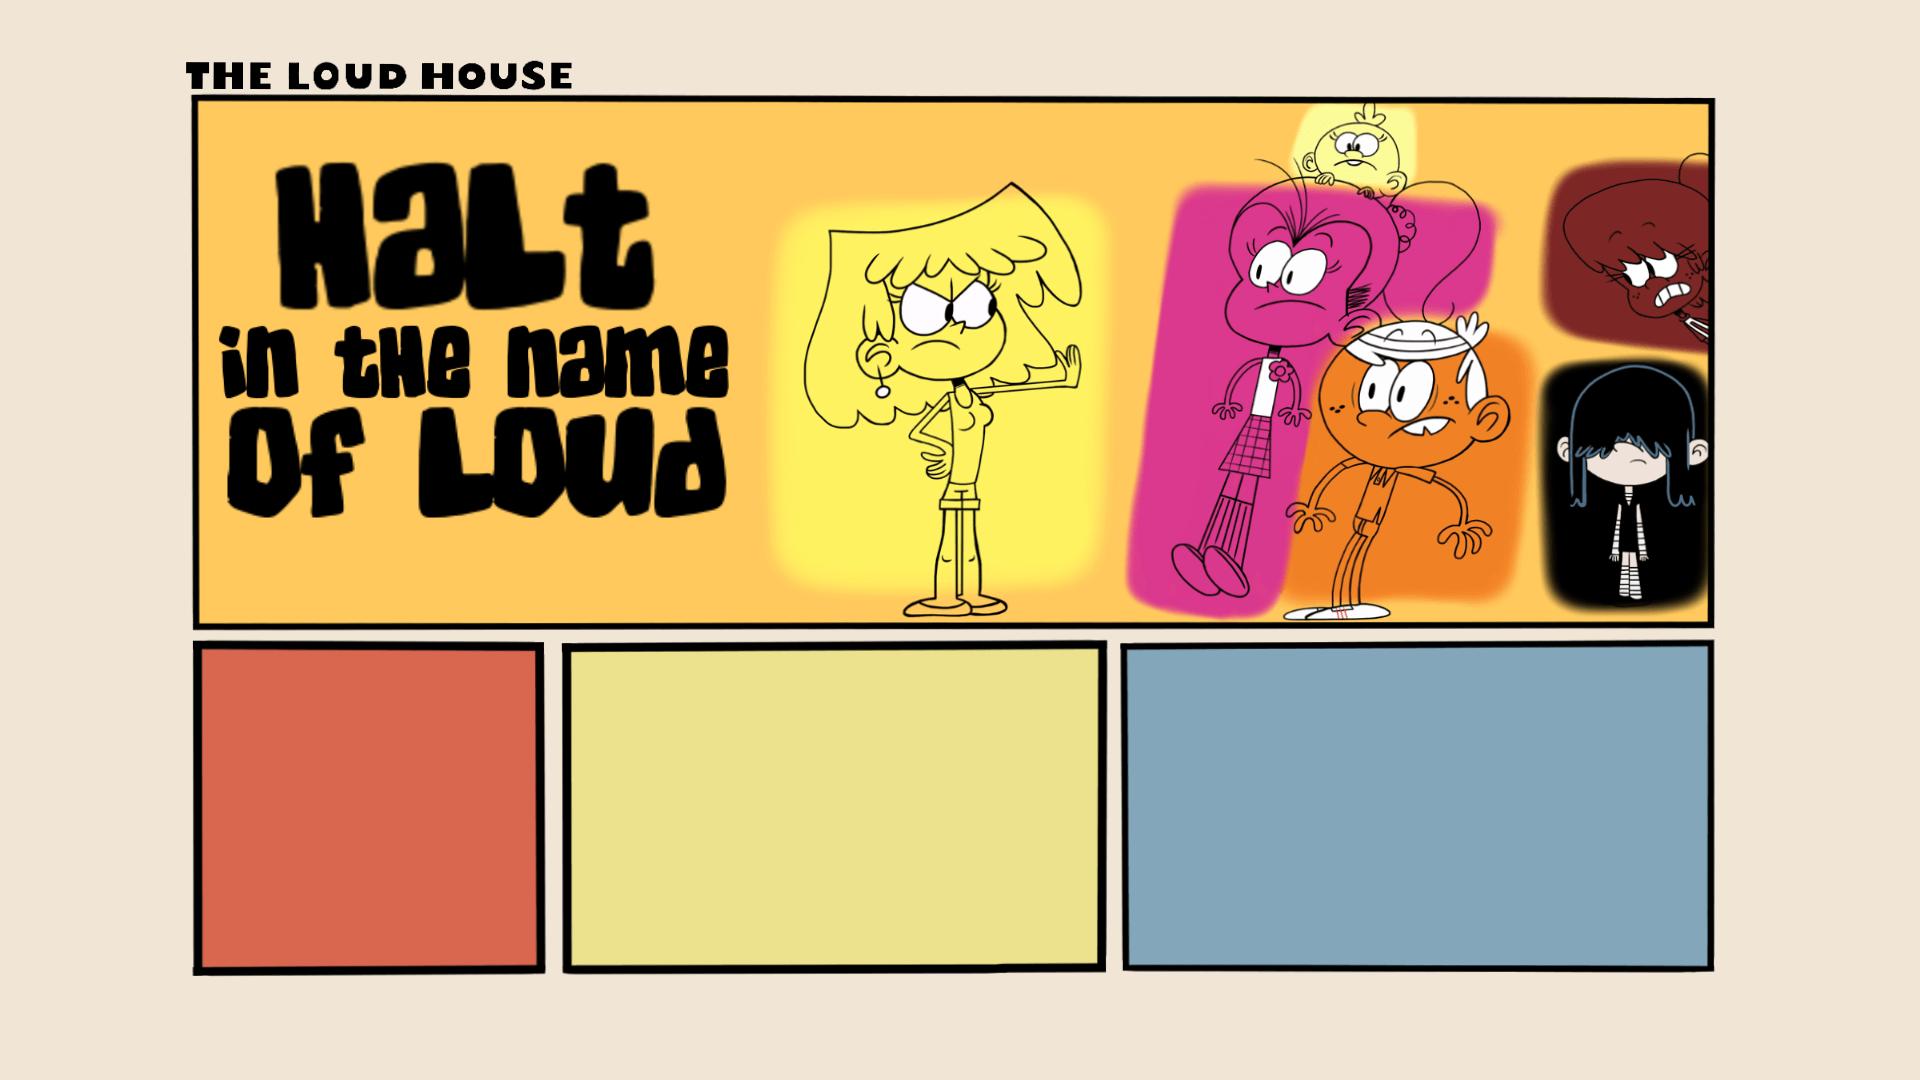 The Loud House on The